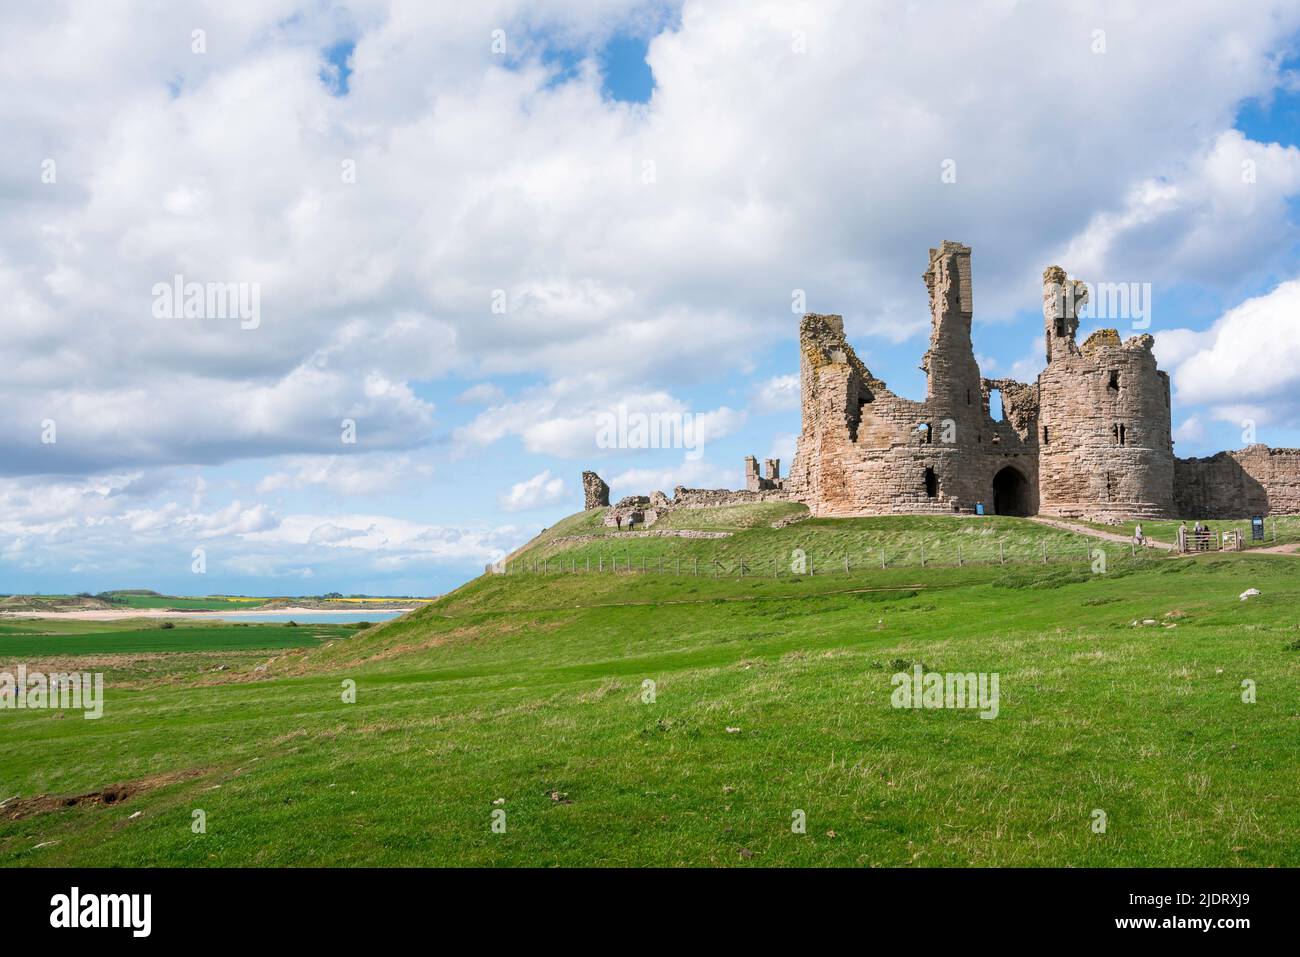 Castle ruins UK, view of the ruined 14th century Dunstanburgh Castle sited on the Northumberland coast near Embleton Bay, England Stock Photo